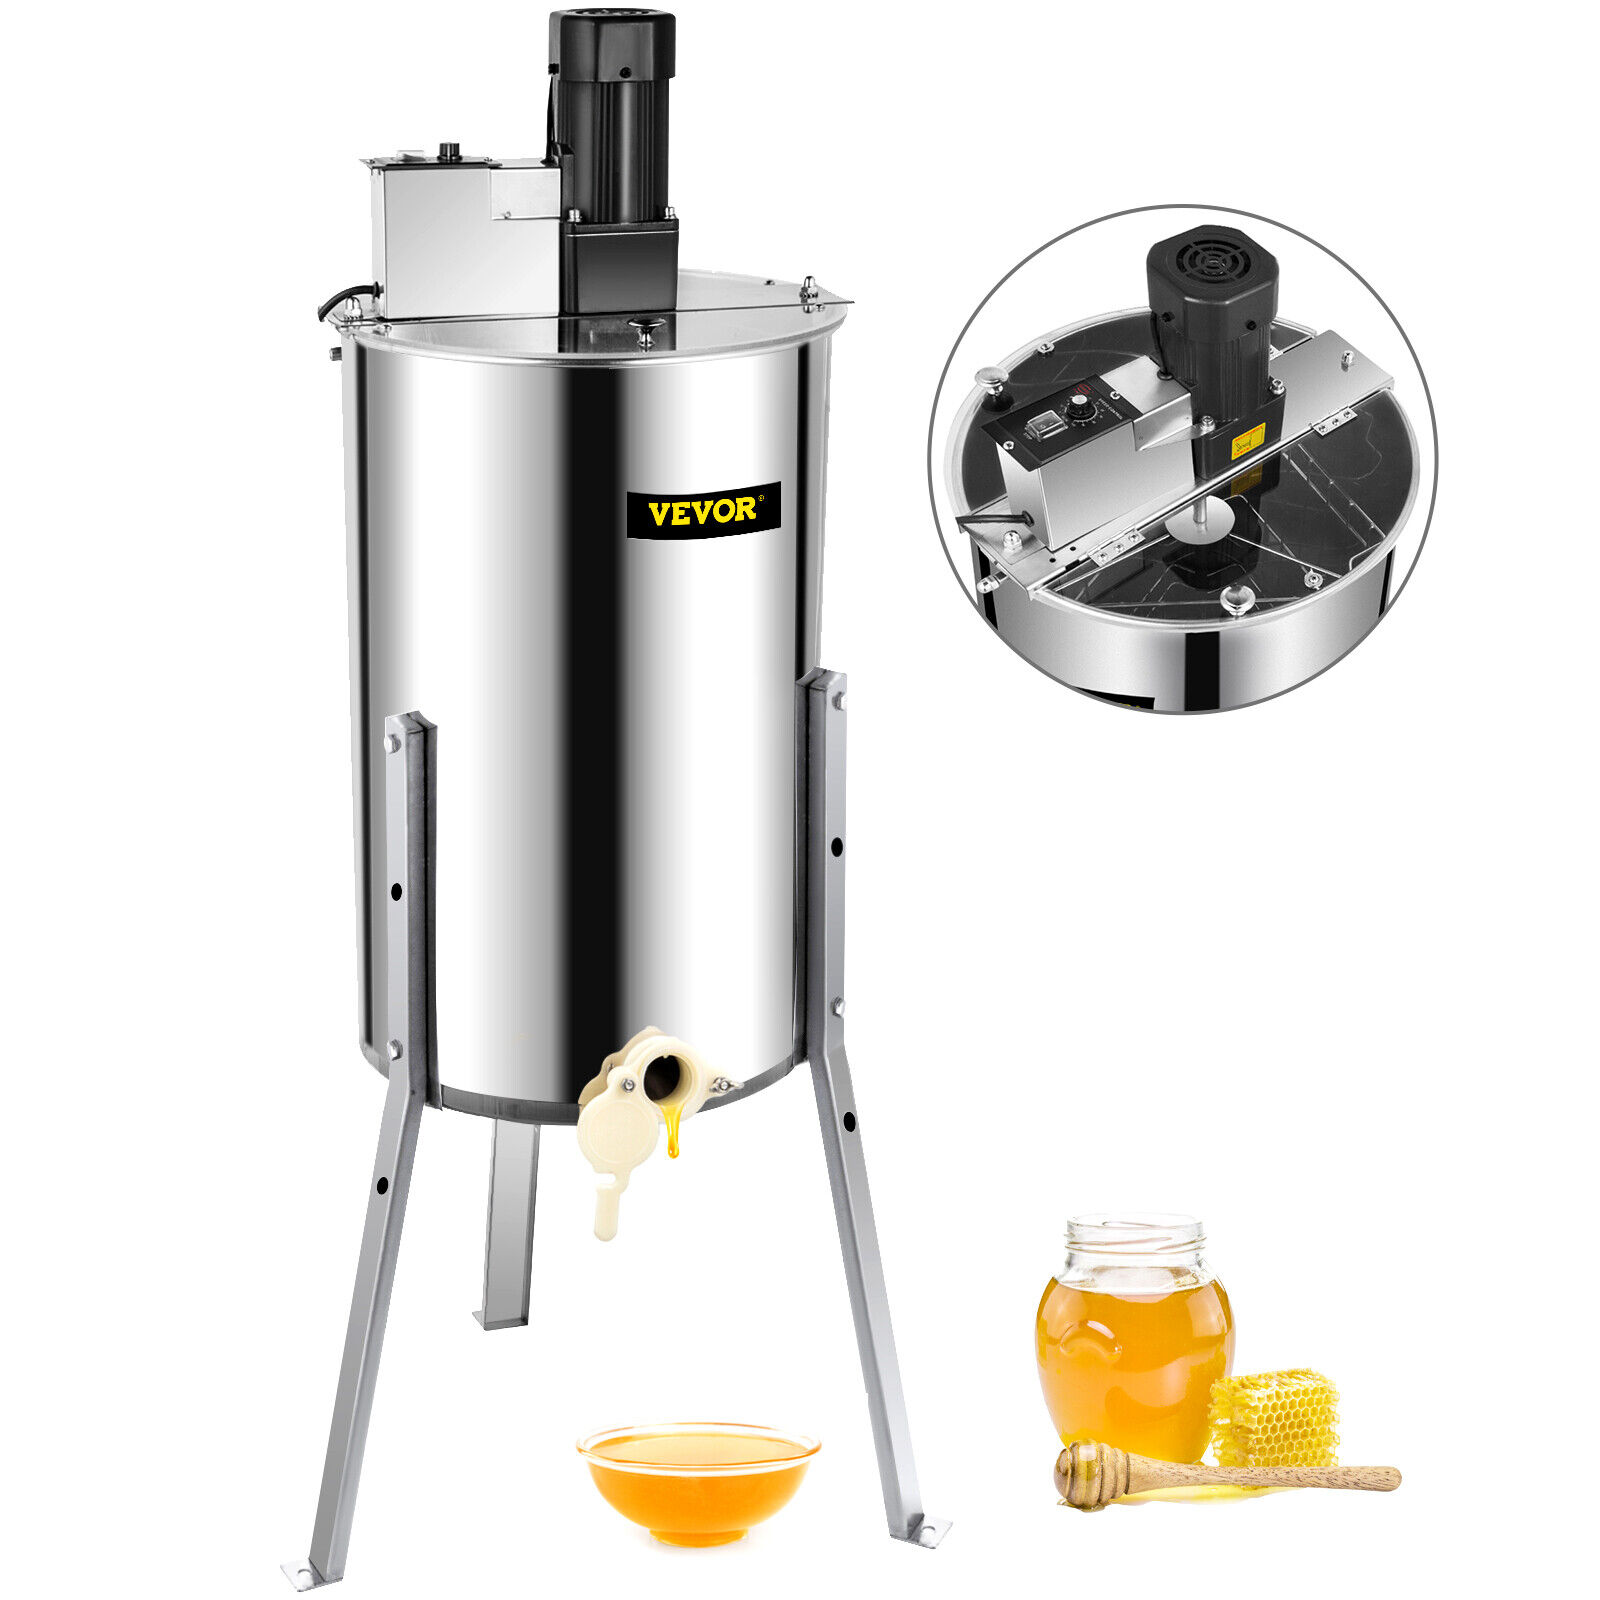 VEVOR 3 Frame Electric Honey Extractor High-quality Stainless Steel Durable